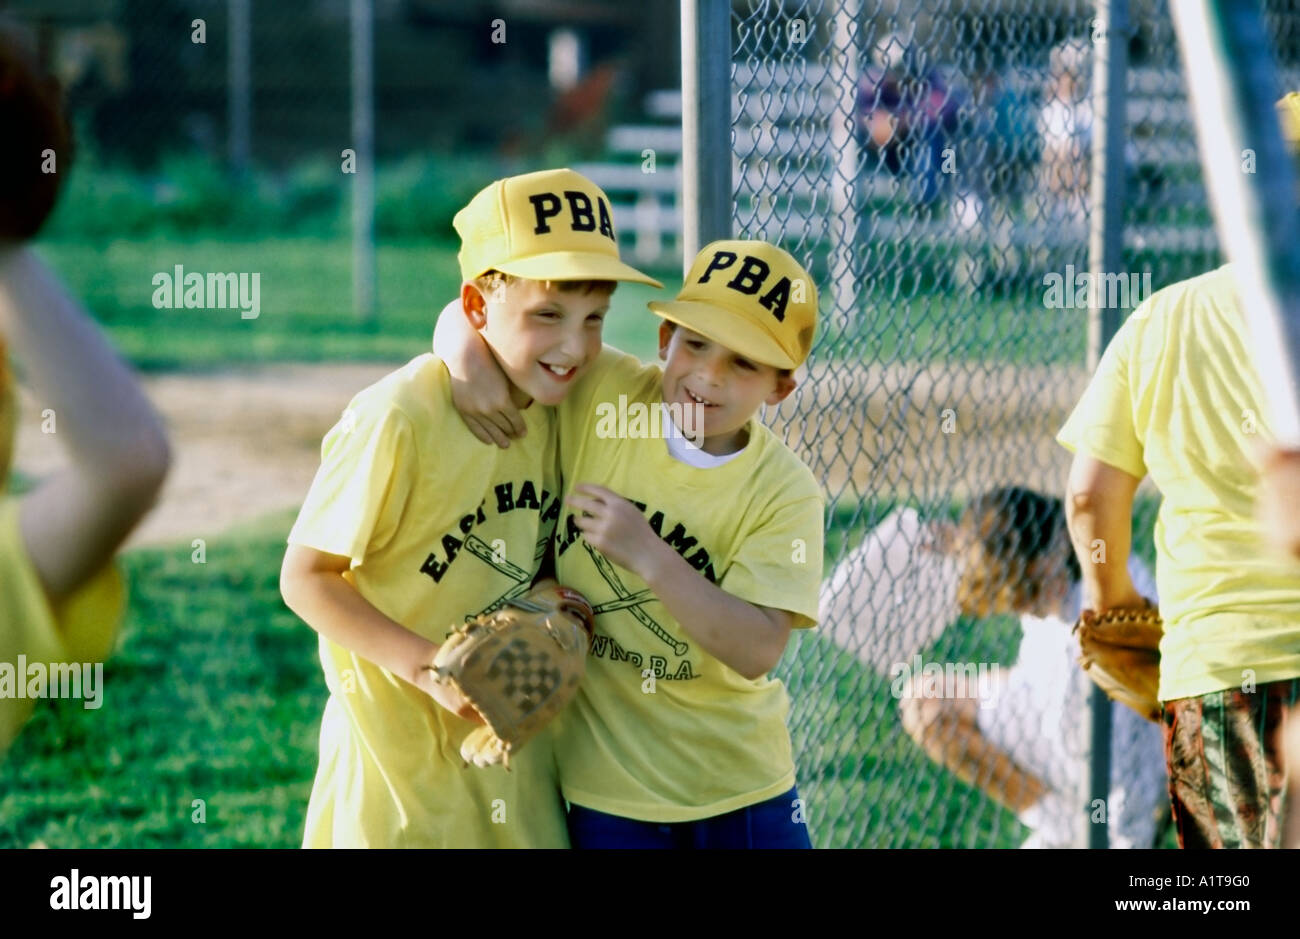 EAST HAMPTON, NY, USA, Two Young Teens, Umarmung bei Male Baseballspiel, Children Playing Game Outside Little League Uniforms Sport Stockfoto